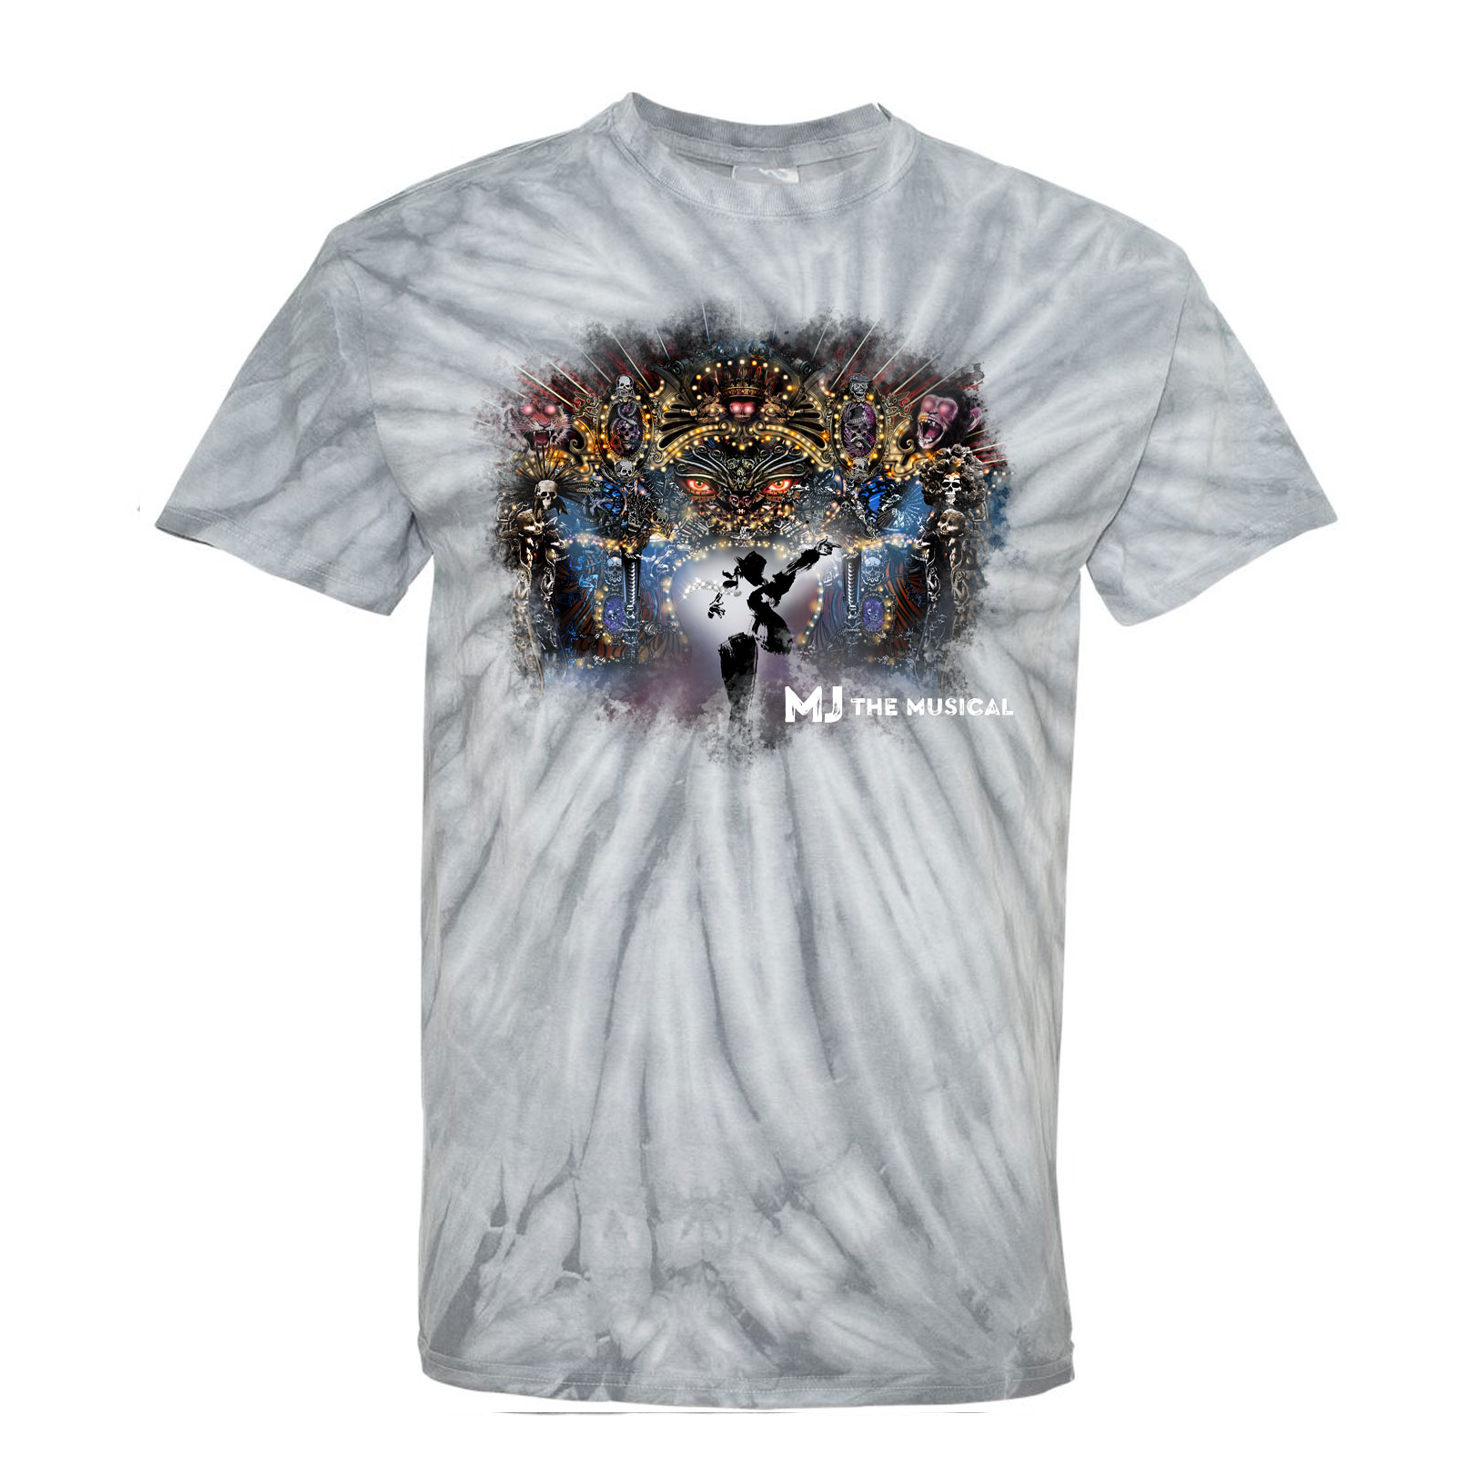 MJ THE MUSICAL Thriller Tee Image